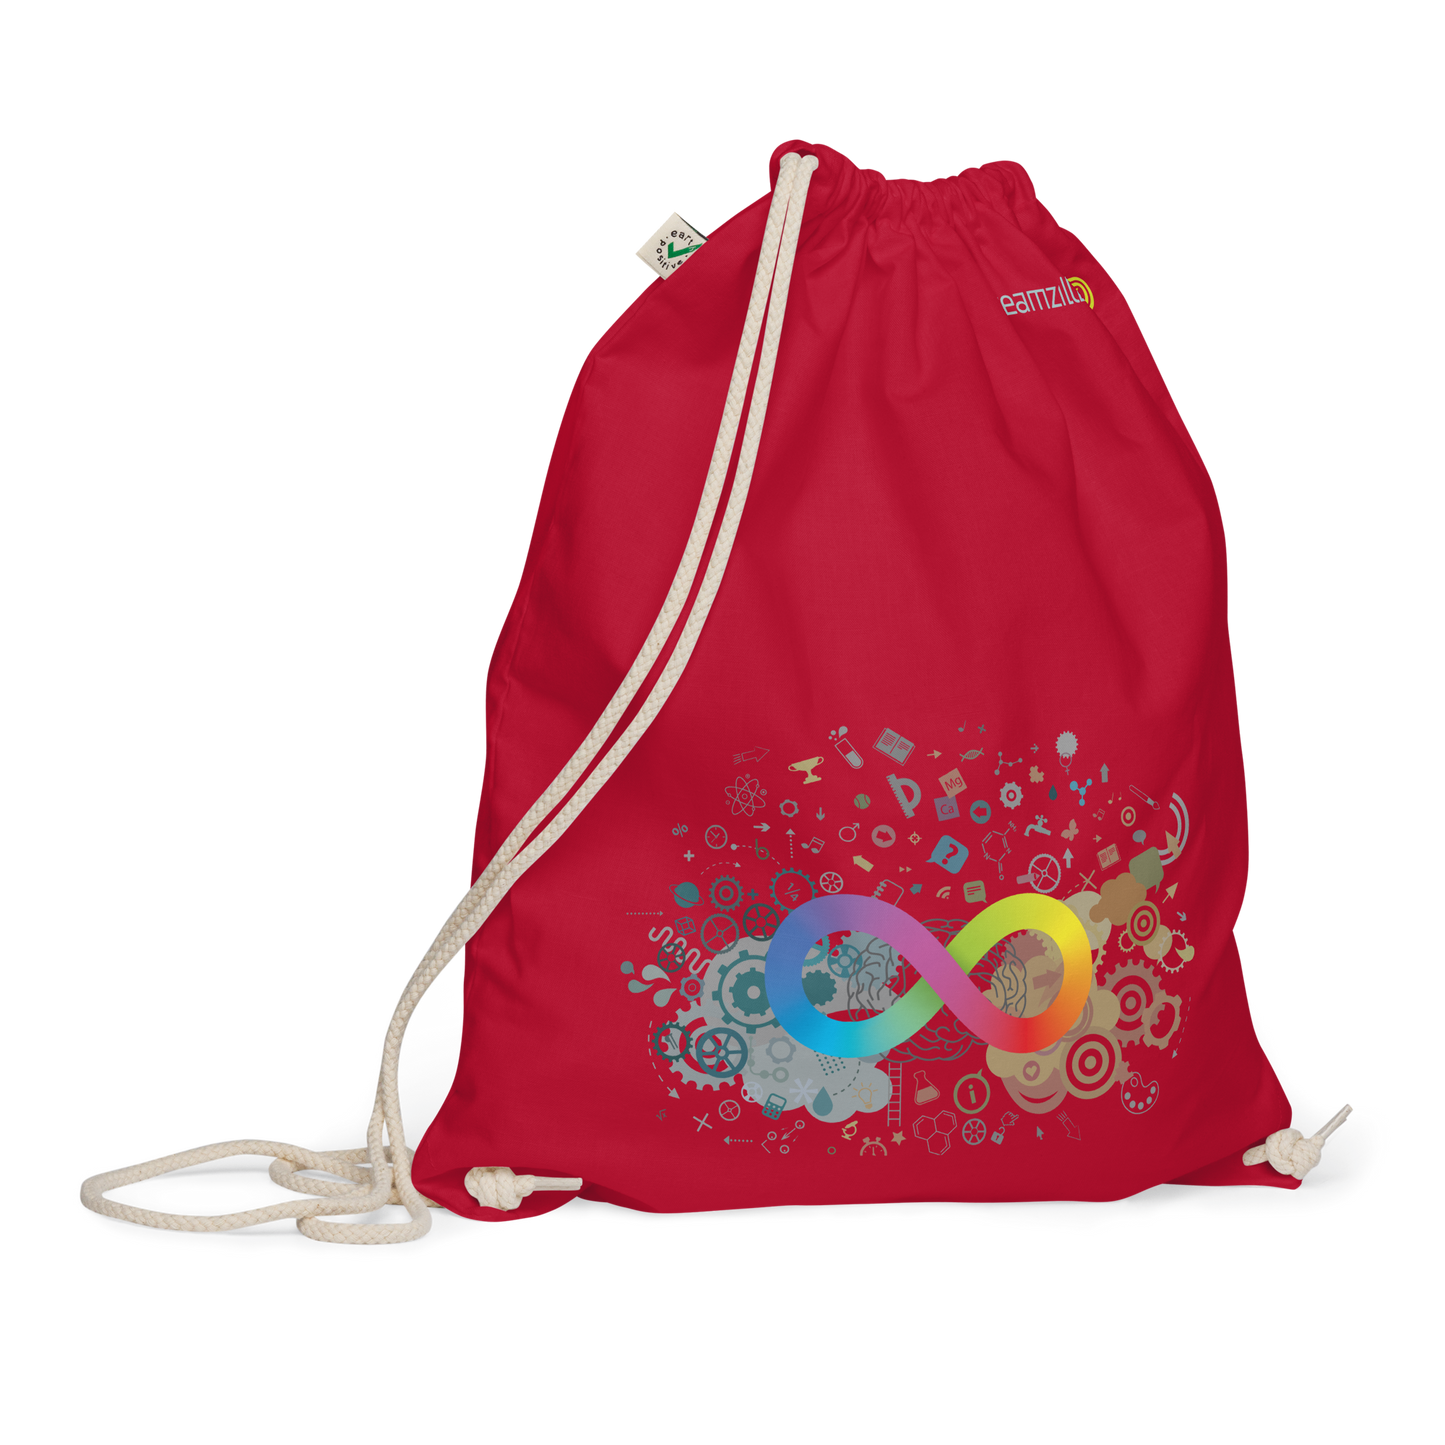 Neurodiversity Rainbow Infinity EarthPositive Cotton Drawstring Bag in Red